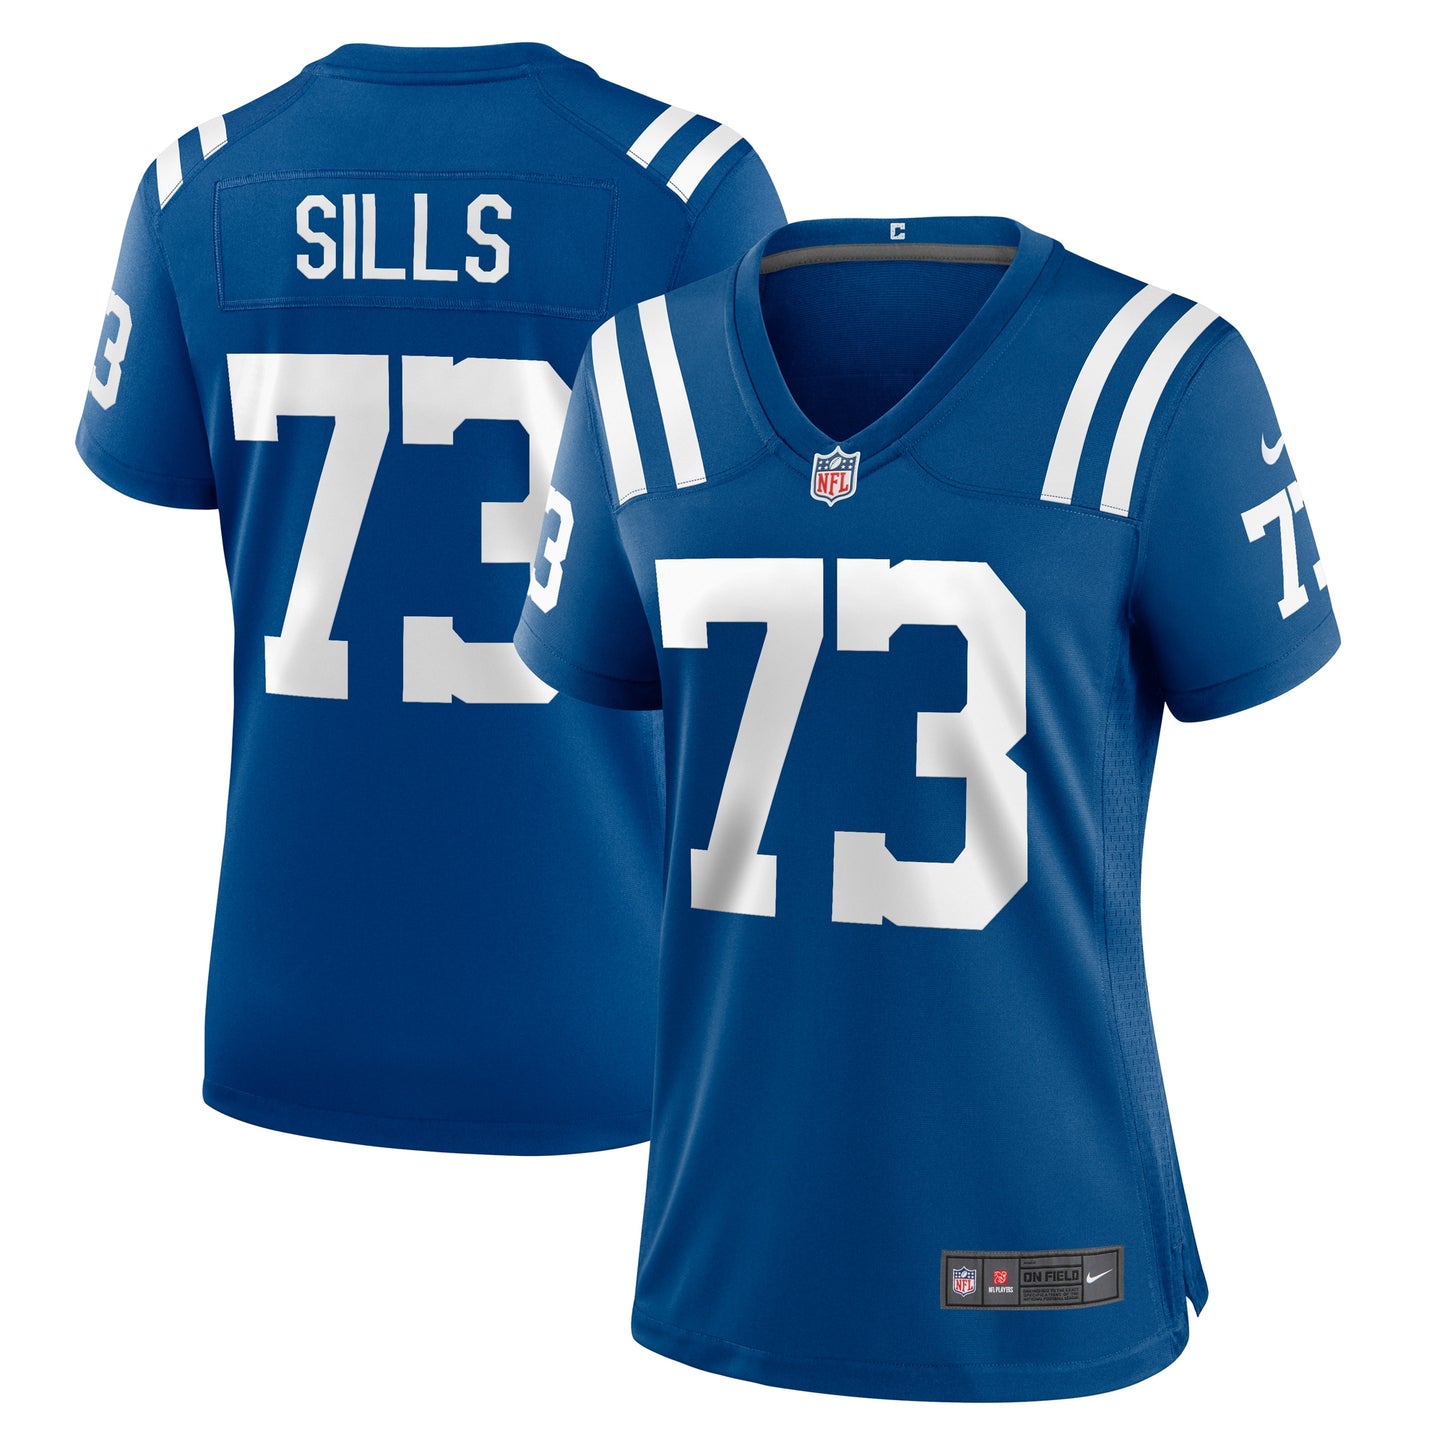 Josh Sills Indianapolis Colts Nike Women's Team Game Jersey - Royal